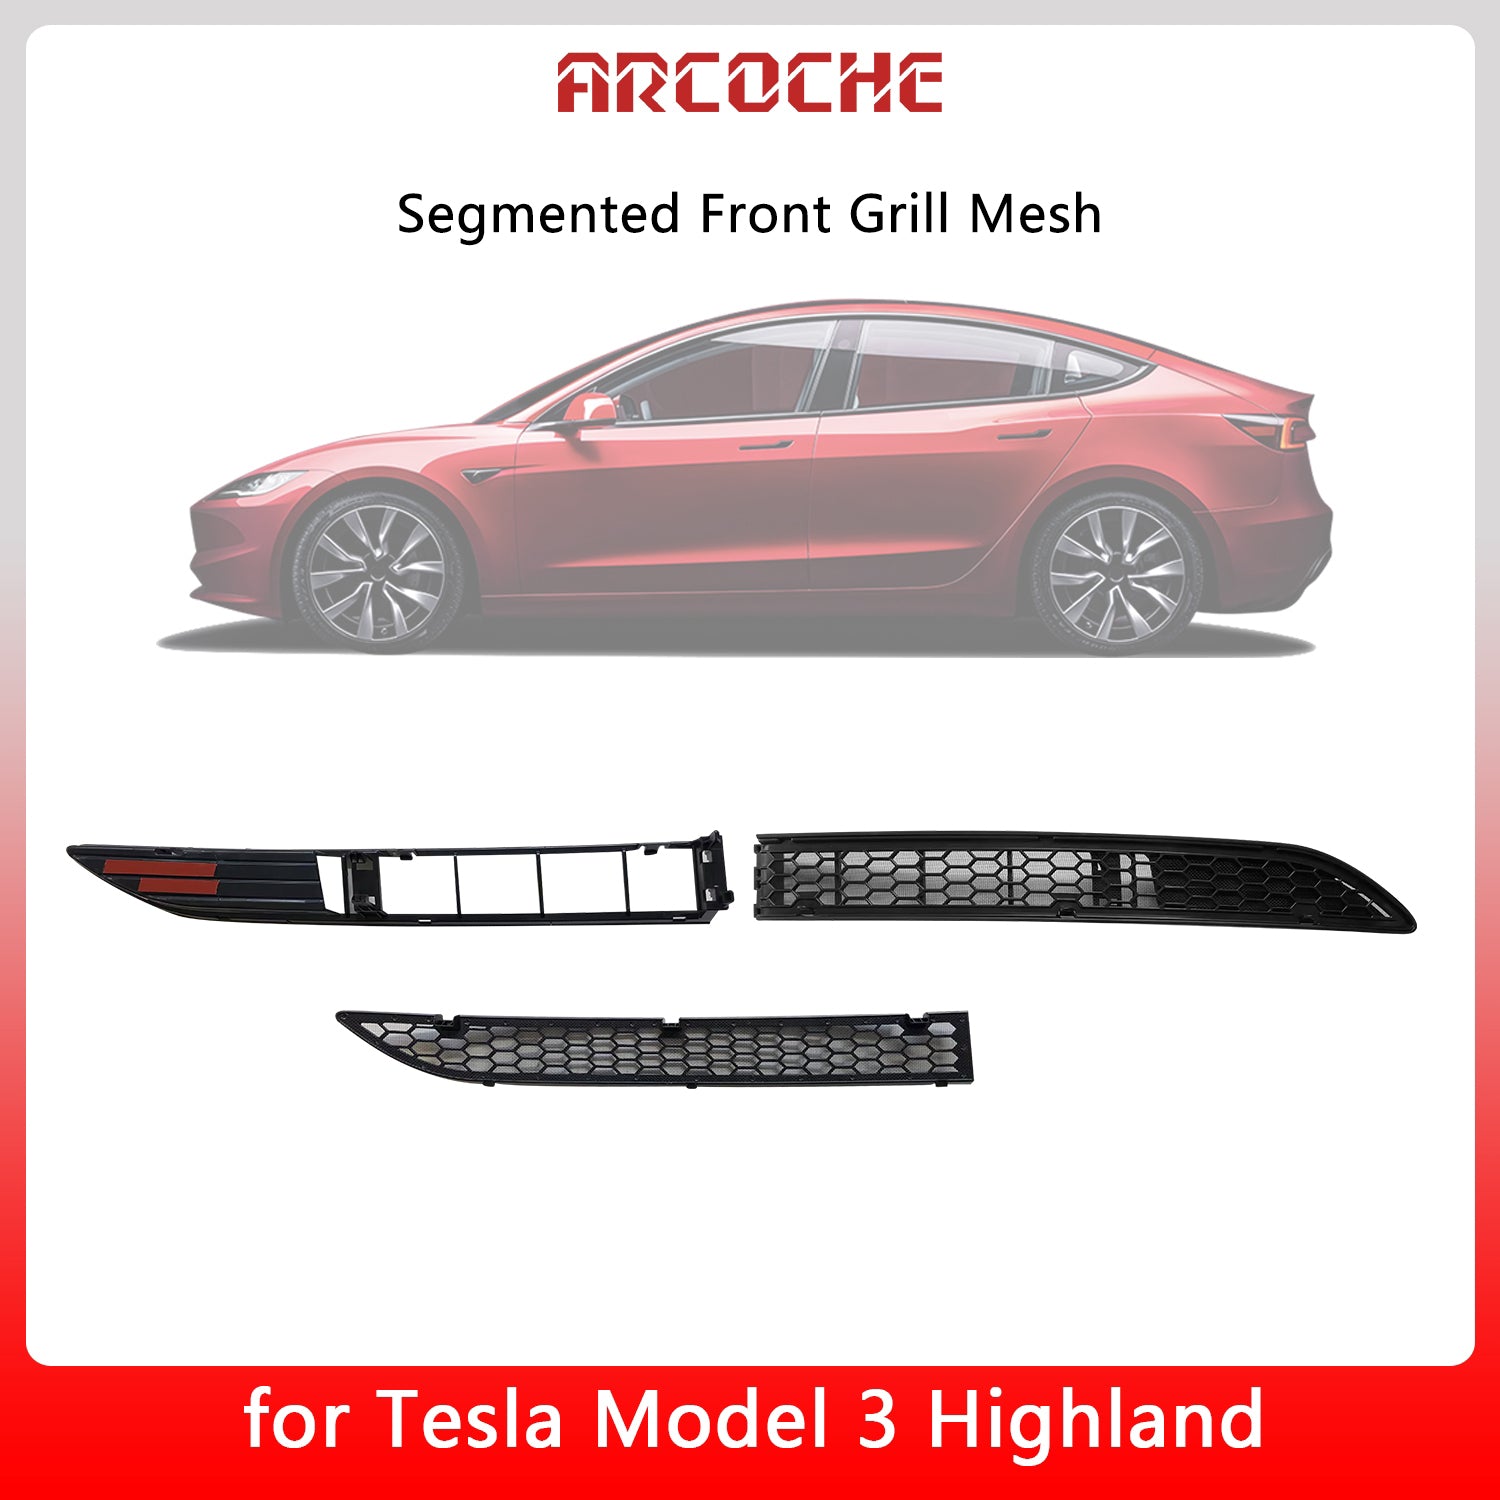 Front Grill Mesh Car Lower Bumper Segmented Integrated Insect Net for  Model3/Highland/Y, Arcoche